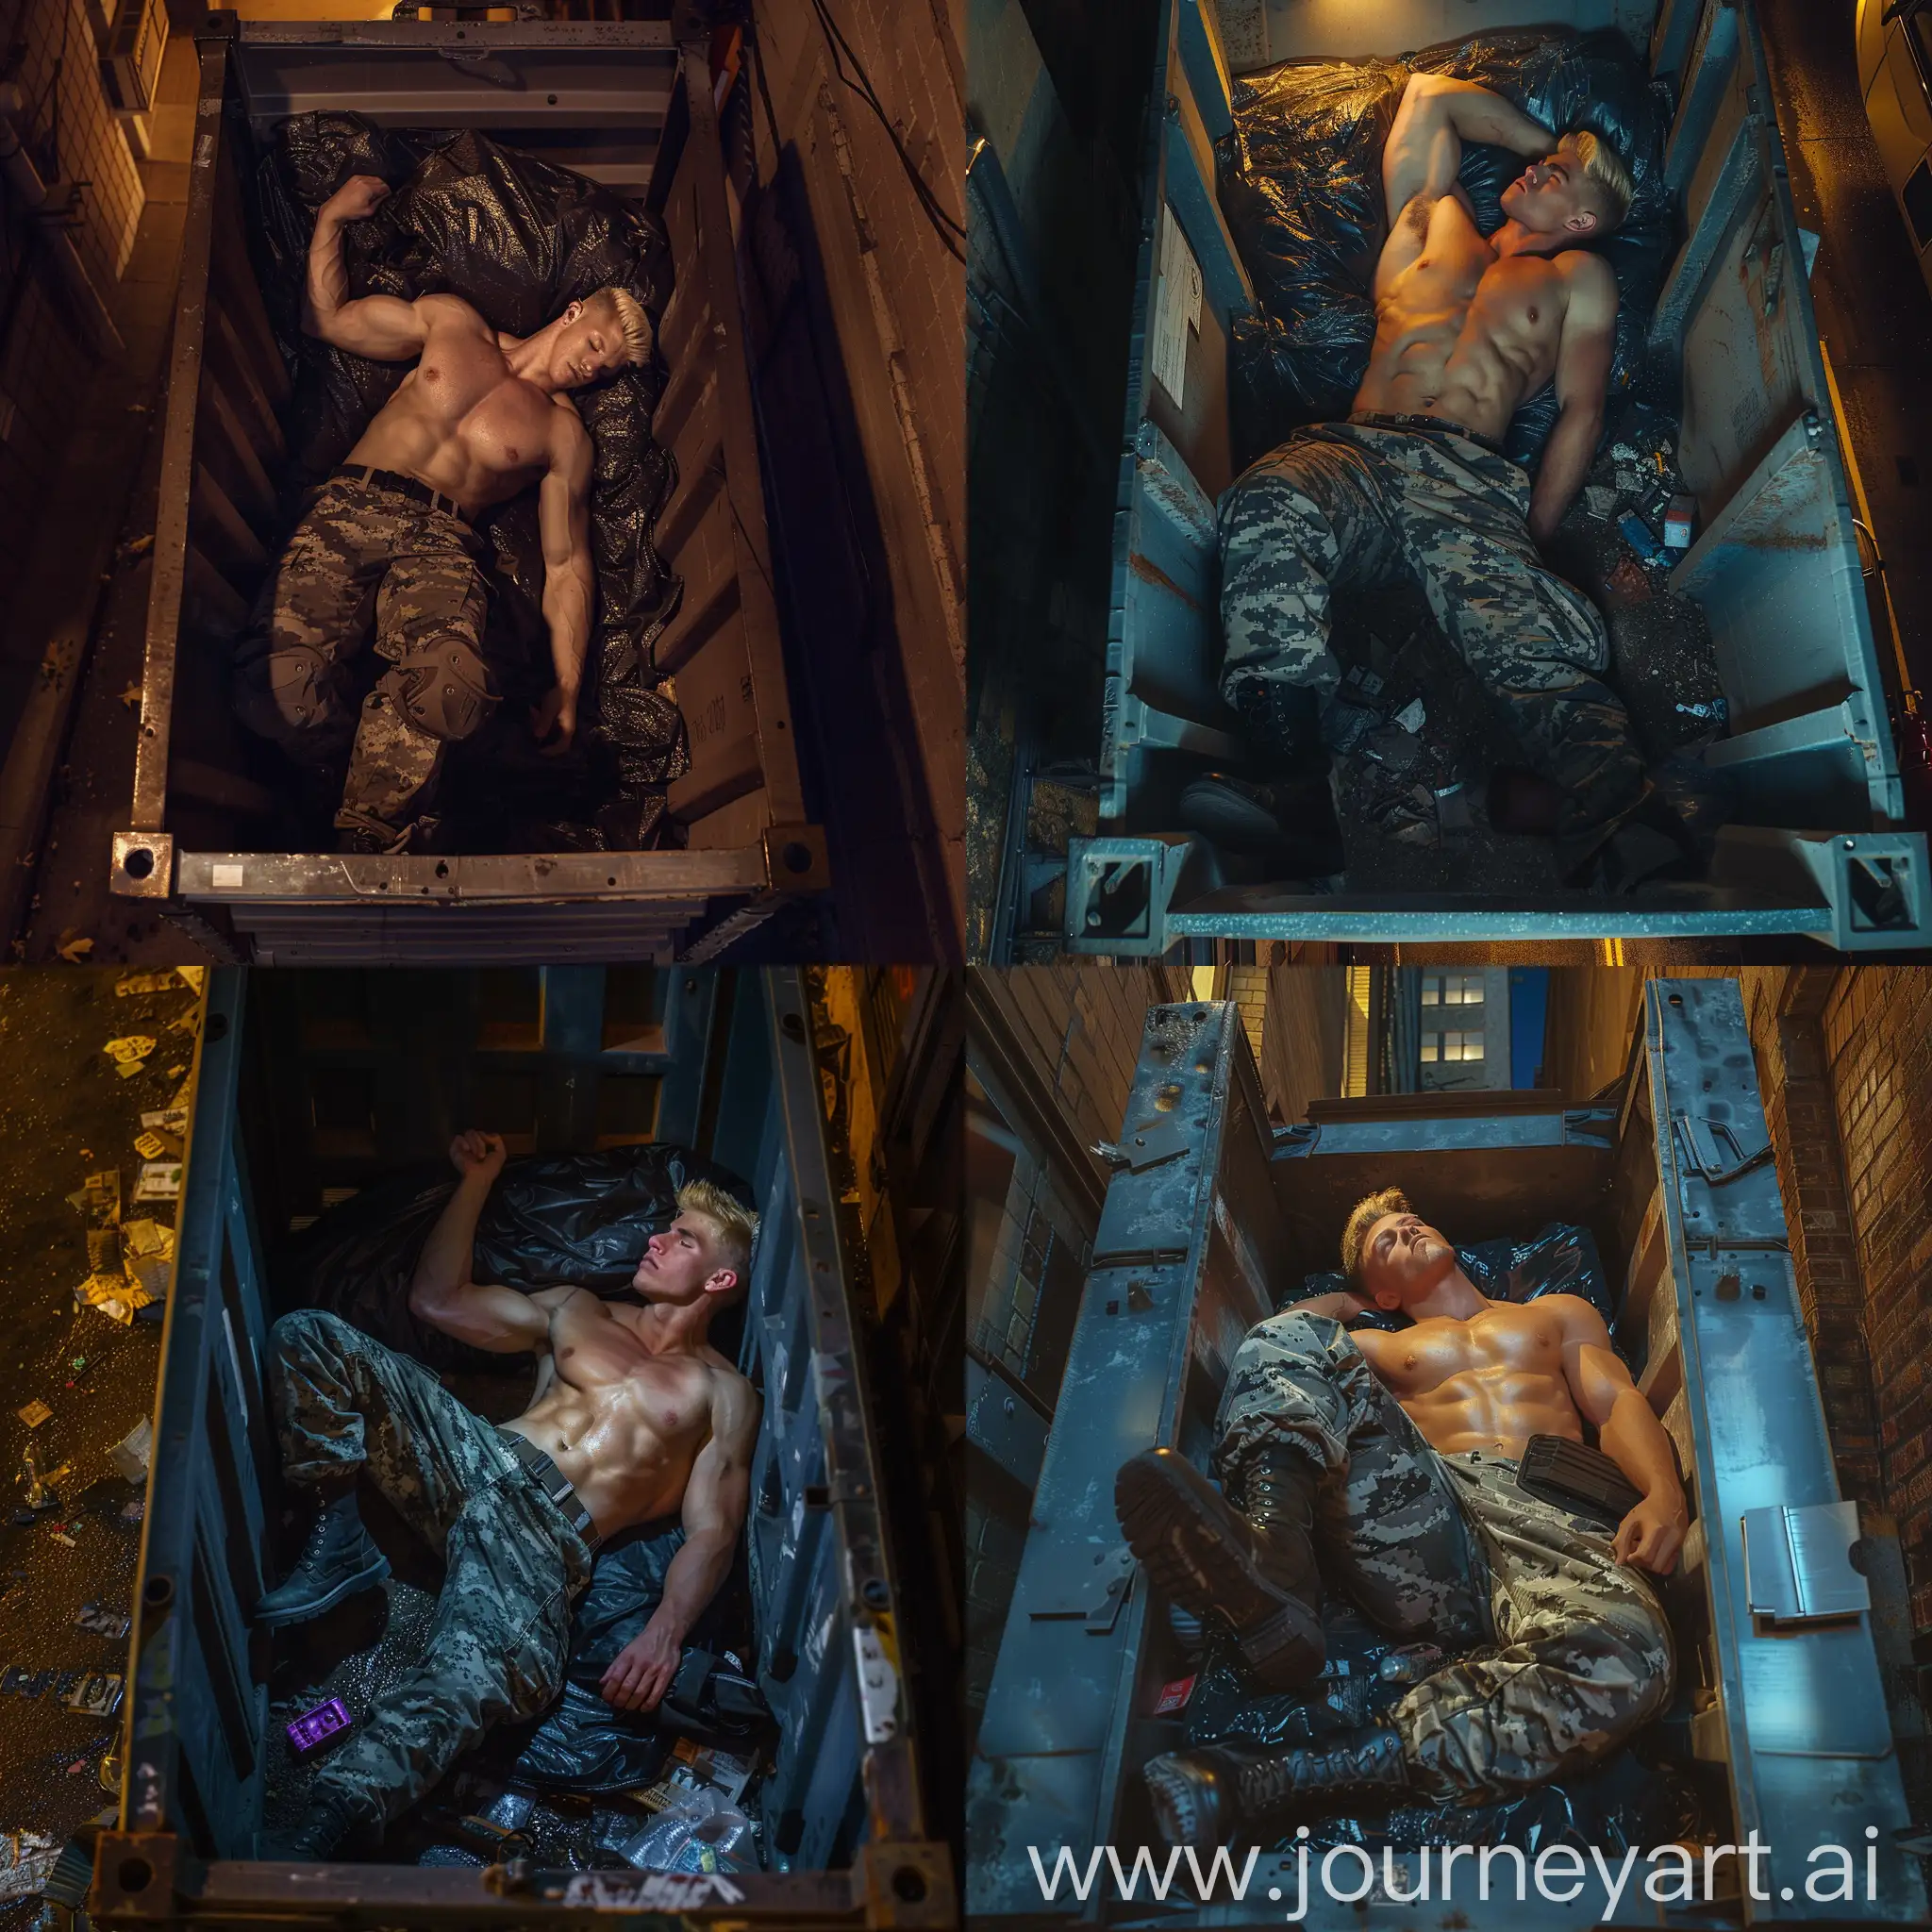 Cinematic lighting, realistic, view from above, a handsome soldier lying inside a dumpster, good looking fit shirtless male young soldier wearing military camouflage pants, handsome soldier with blond hair, wearing camouflage pants, lying inside a dumpster, sleeping inside a trash dumpster, alley background at night, and wearing black boots, wearing black military boots